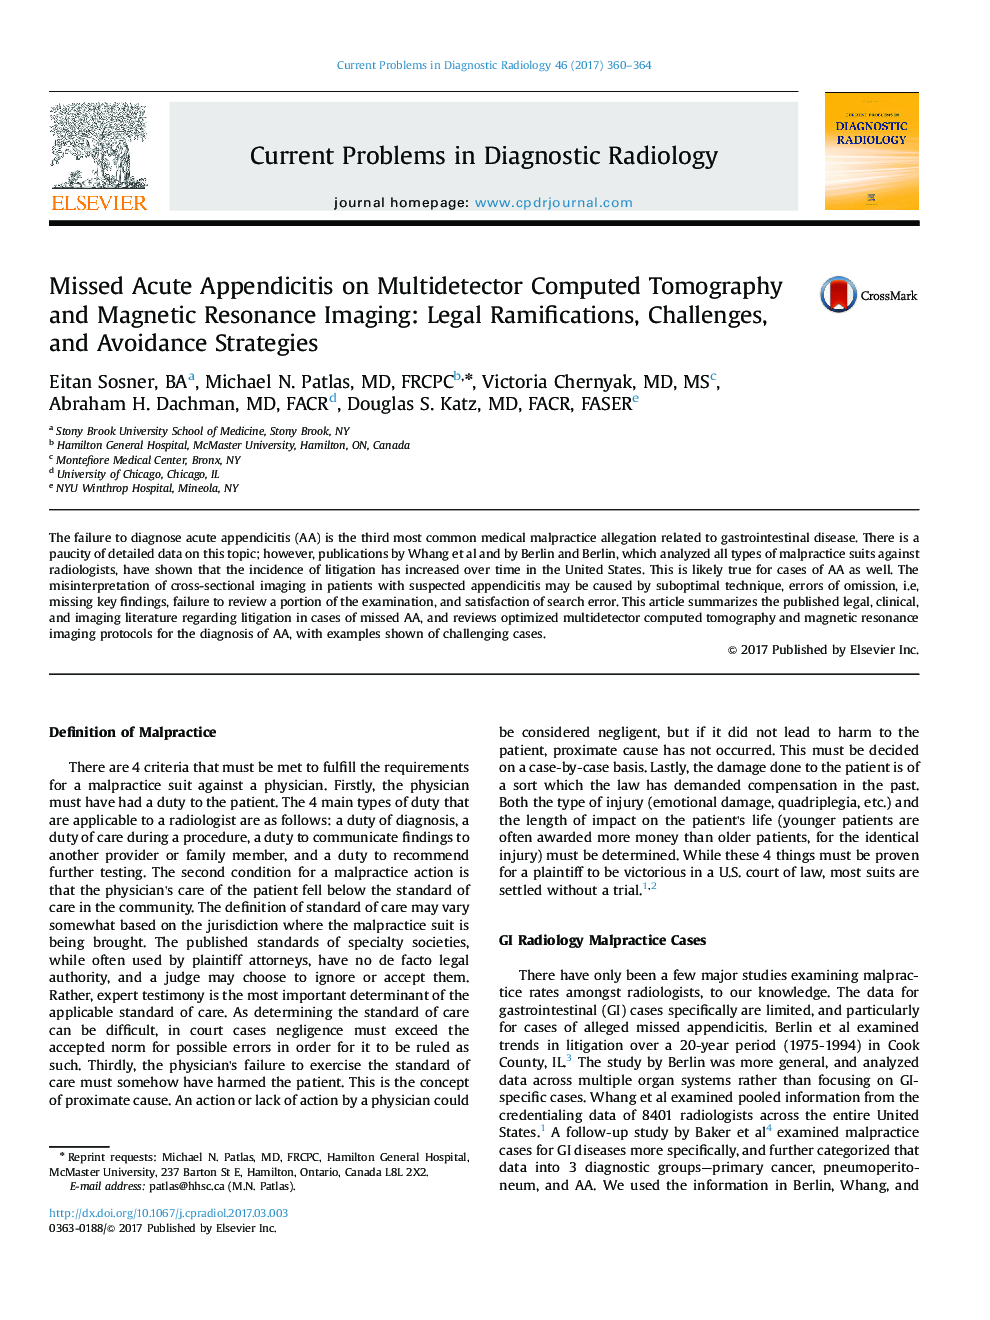 Missed Acute Appendicitis on Multidetector Computed Tomography and Magnetic Resonance Imaging: Legal Ramifications, Challenges, and Avoidance Strategies